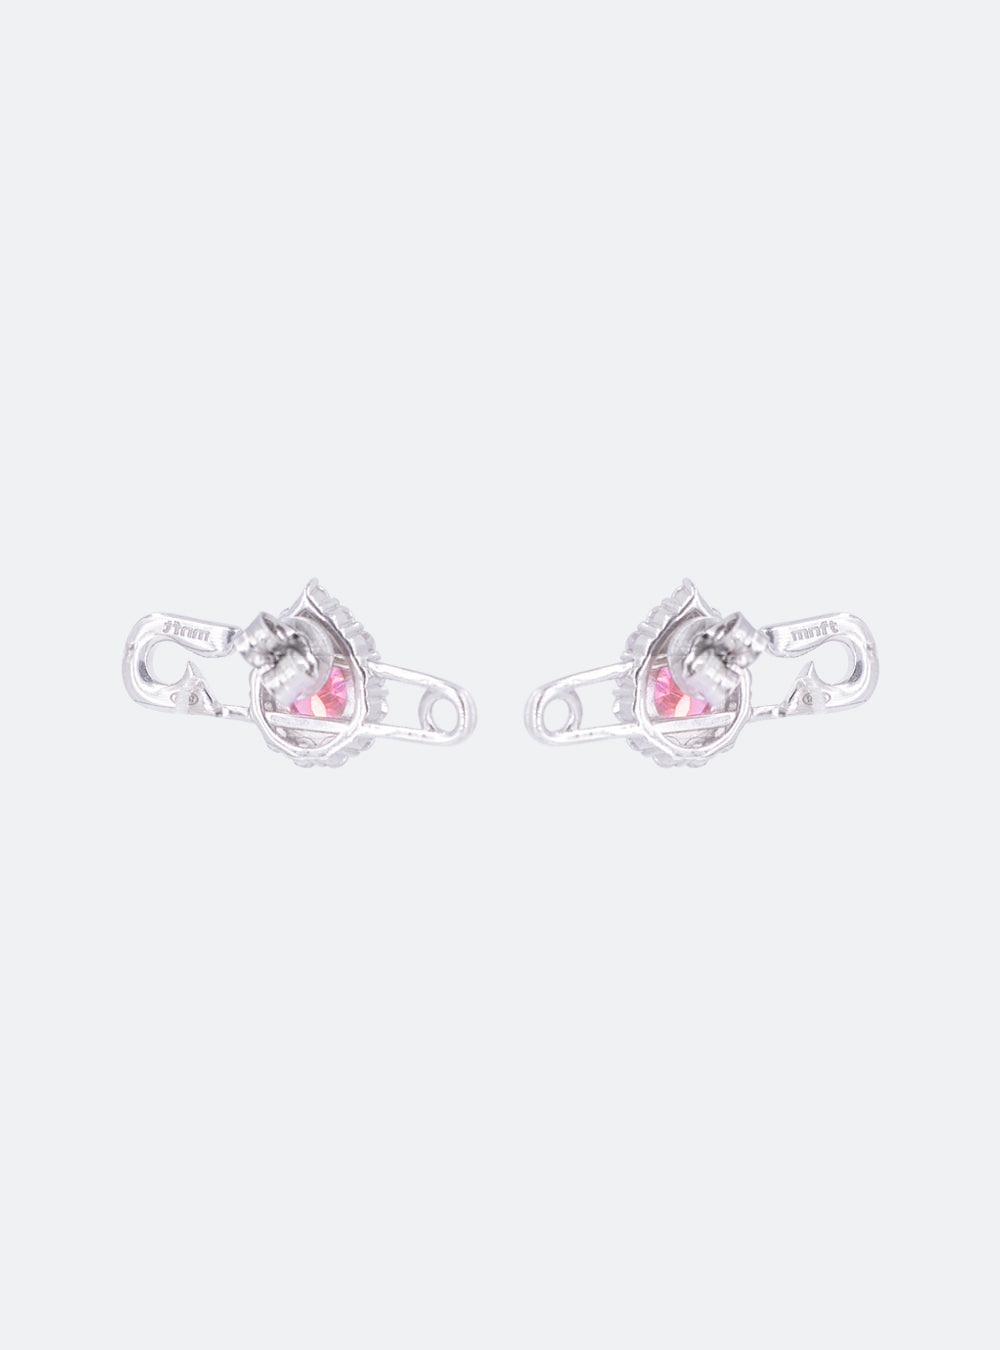 A pair of MIDNIGHTFACTORY Cocktail safety-pin earrings with pink stones on a white background.